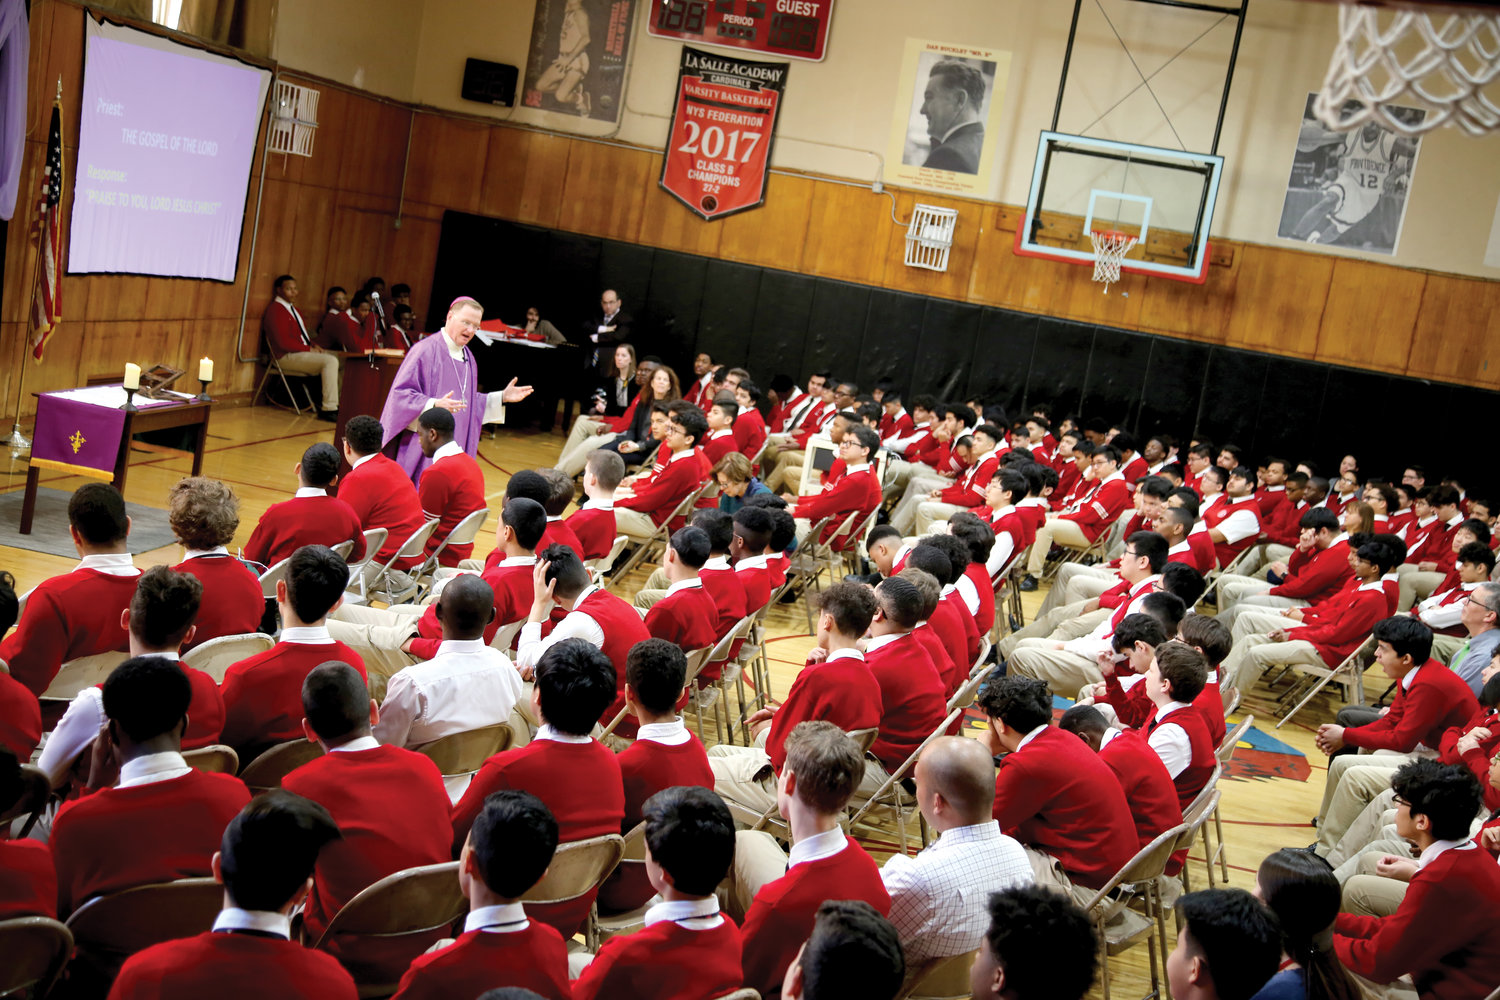 Auxiliary Bishop Edmund Whalen, vicar for clergy in the archdiocese, offers Mass March 2 at La Salle Academy, a boys’ high school in lower Manhattan.